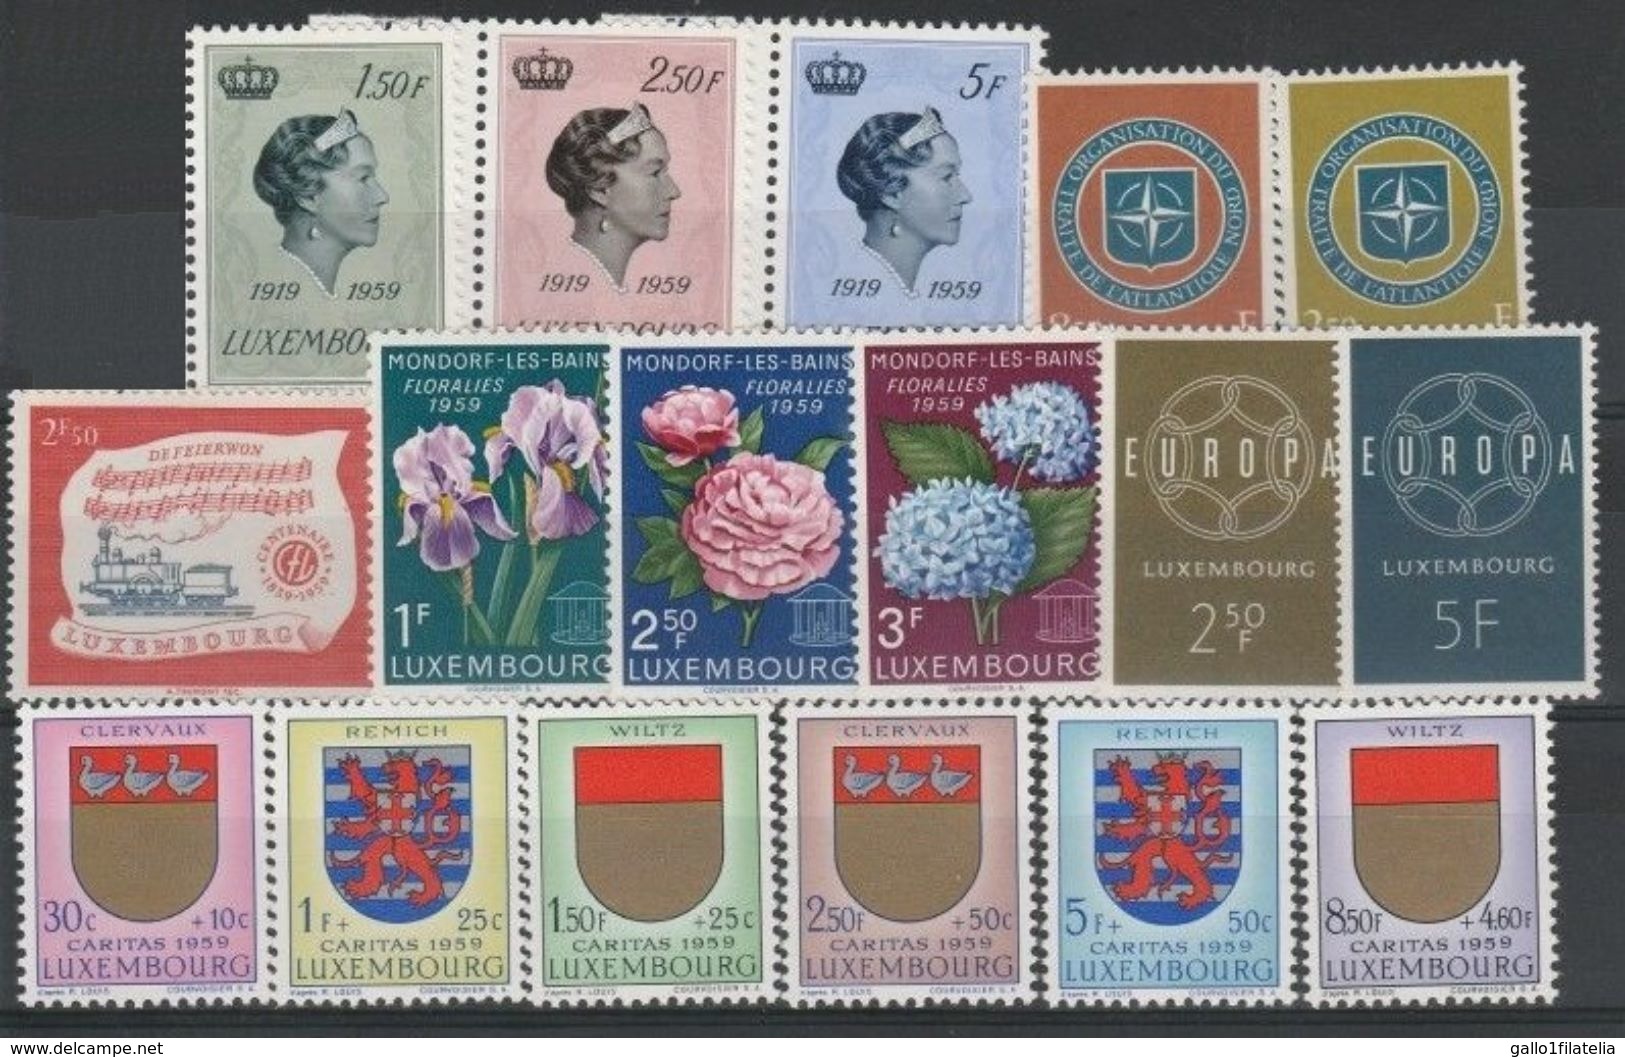 1959-LUSSEMBURGO / LUXEMBOURG-ANNATA COMPLETA / COMPLETE YEAR. MNH - Años Completos